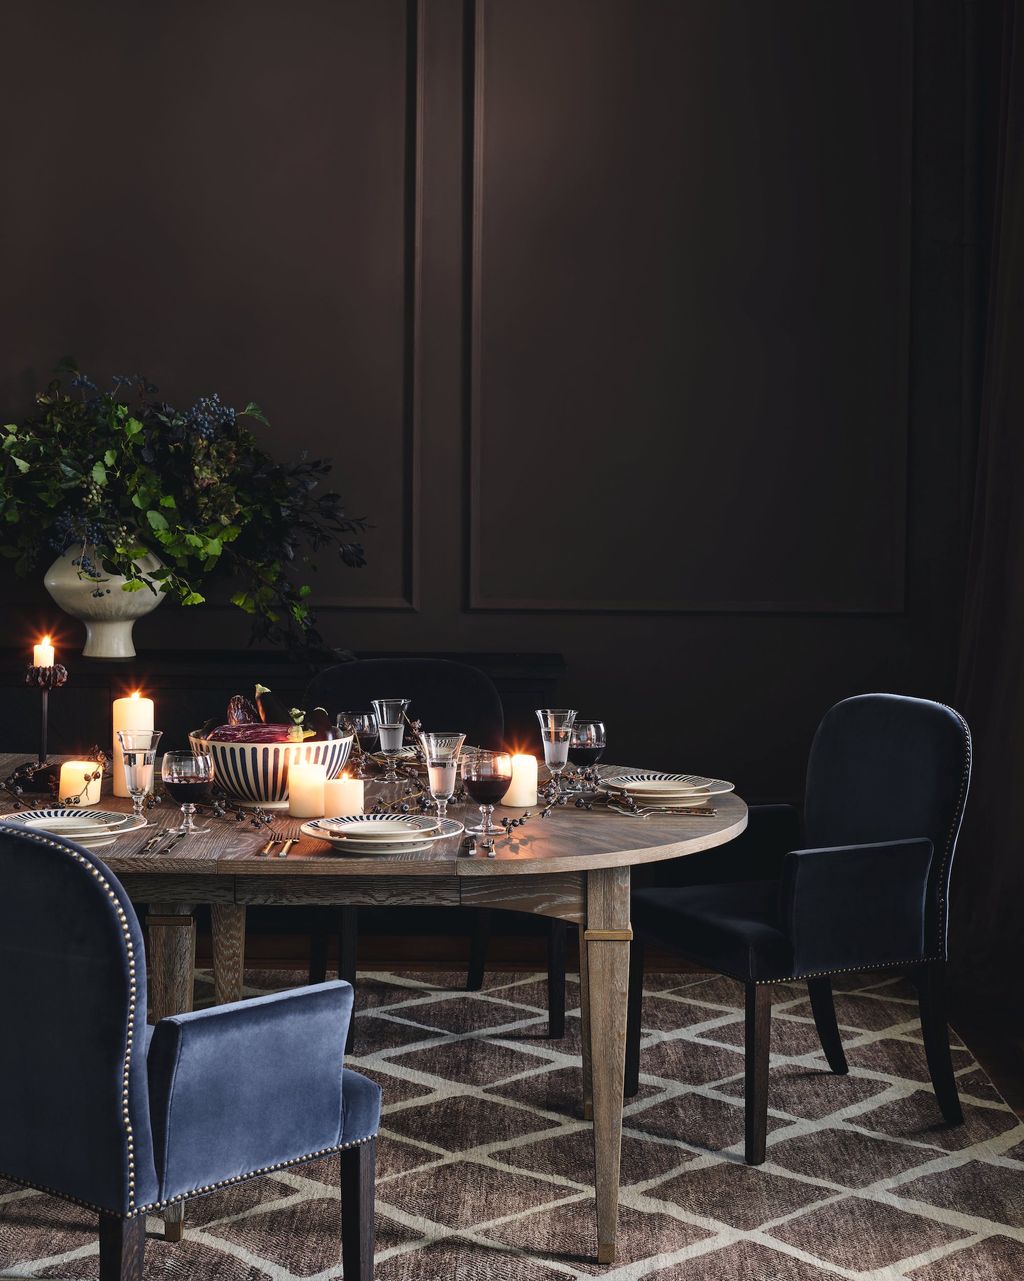 How to style a dining table when not in use: 6 expert tips